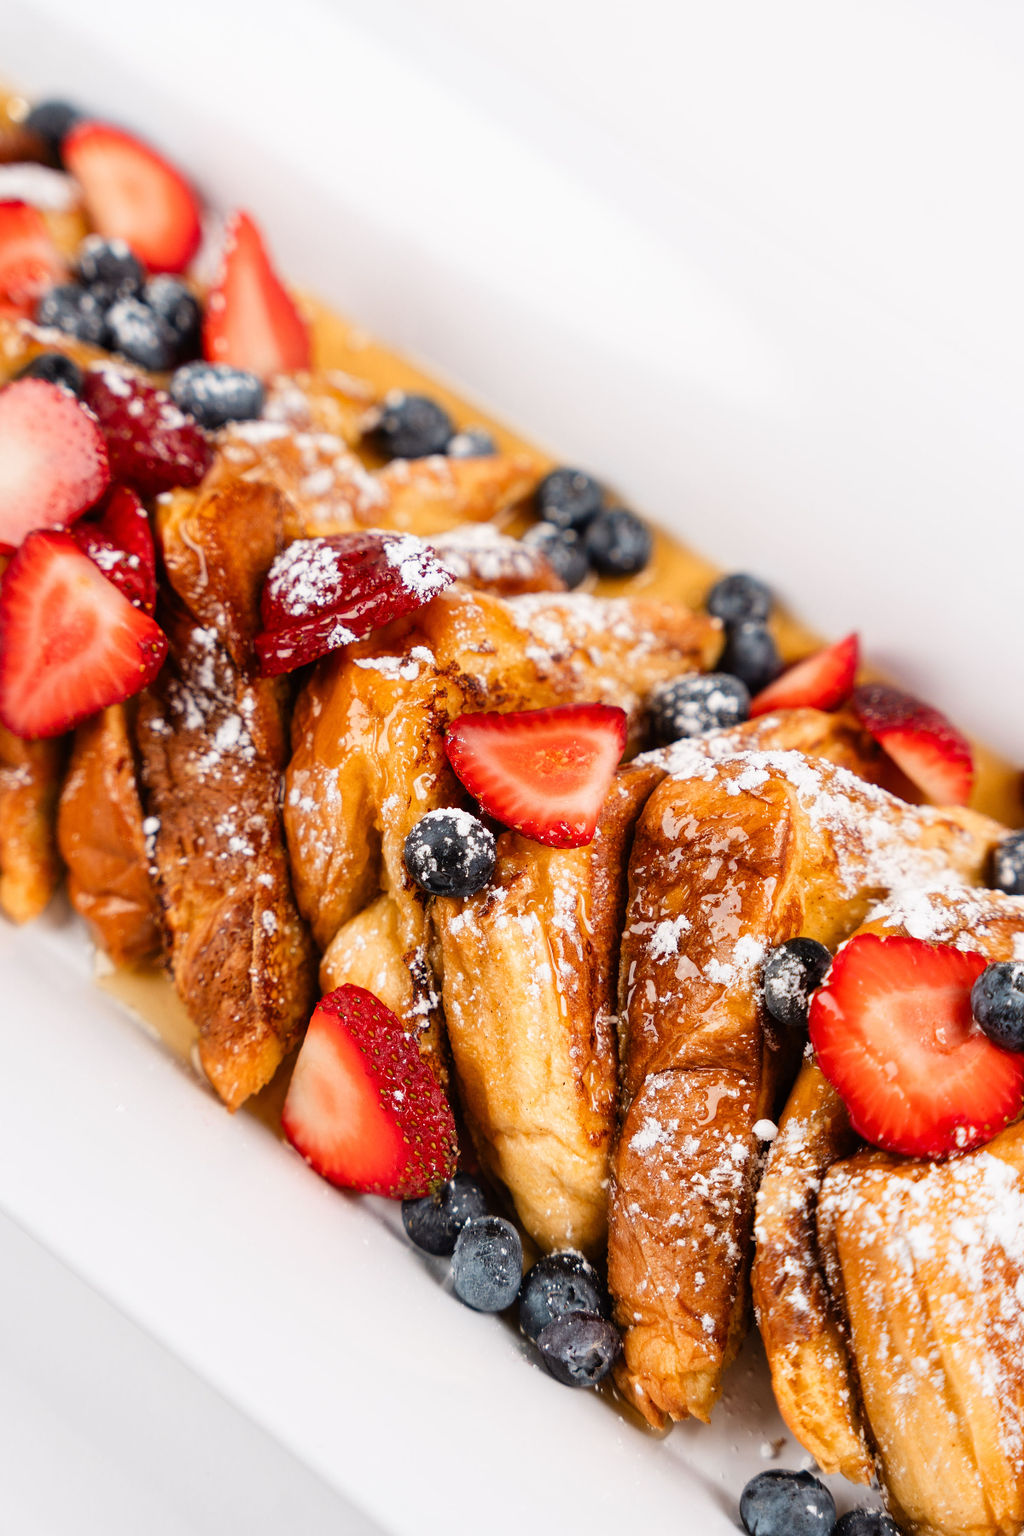 french-toast-brunch-and-breakfast-catering-package-scotsdale-kale-chef-service